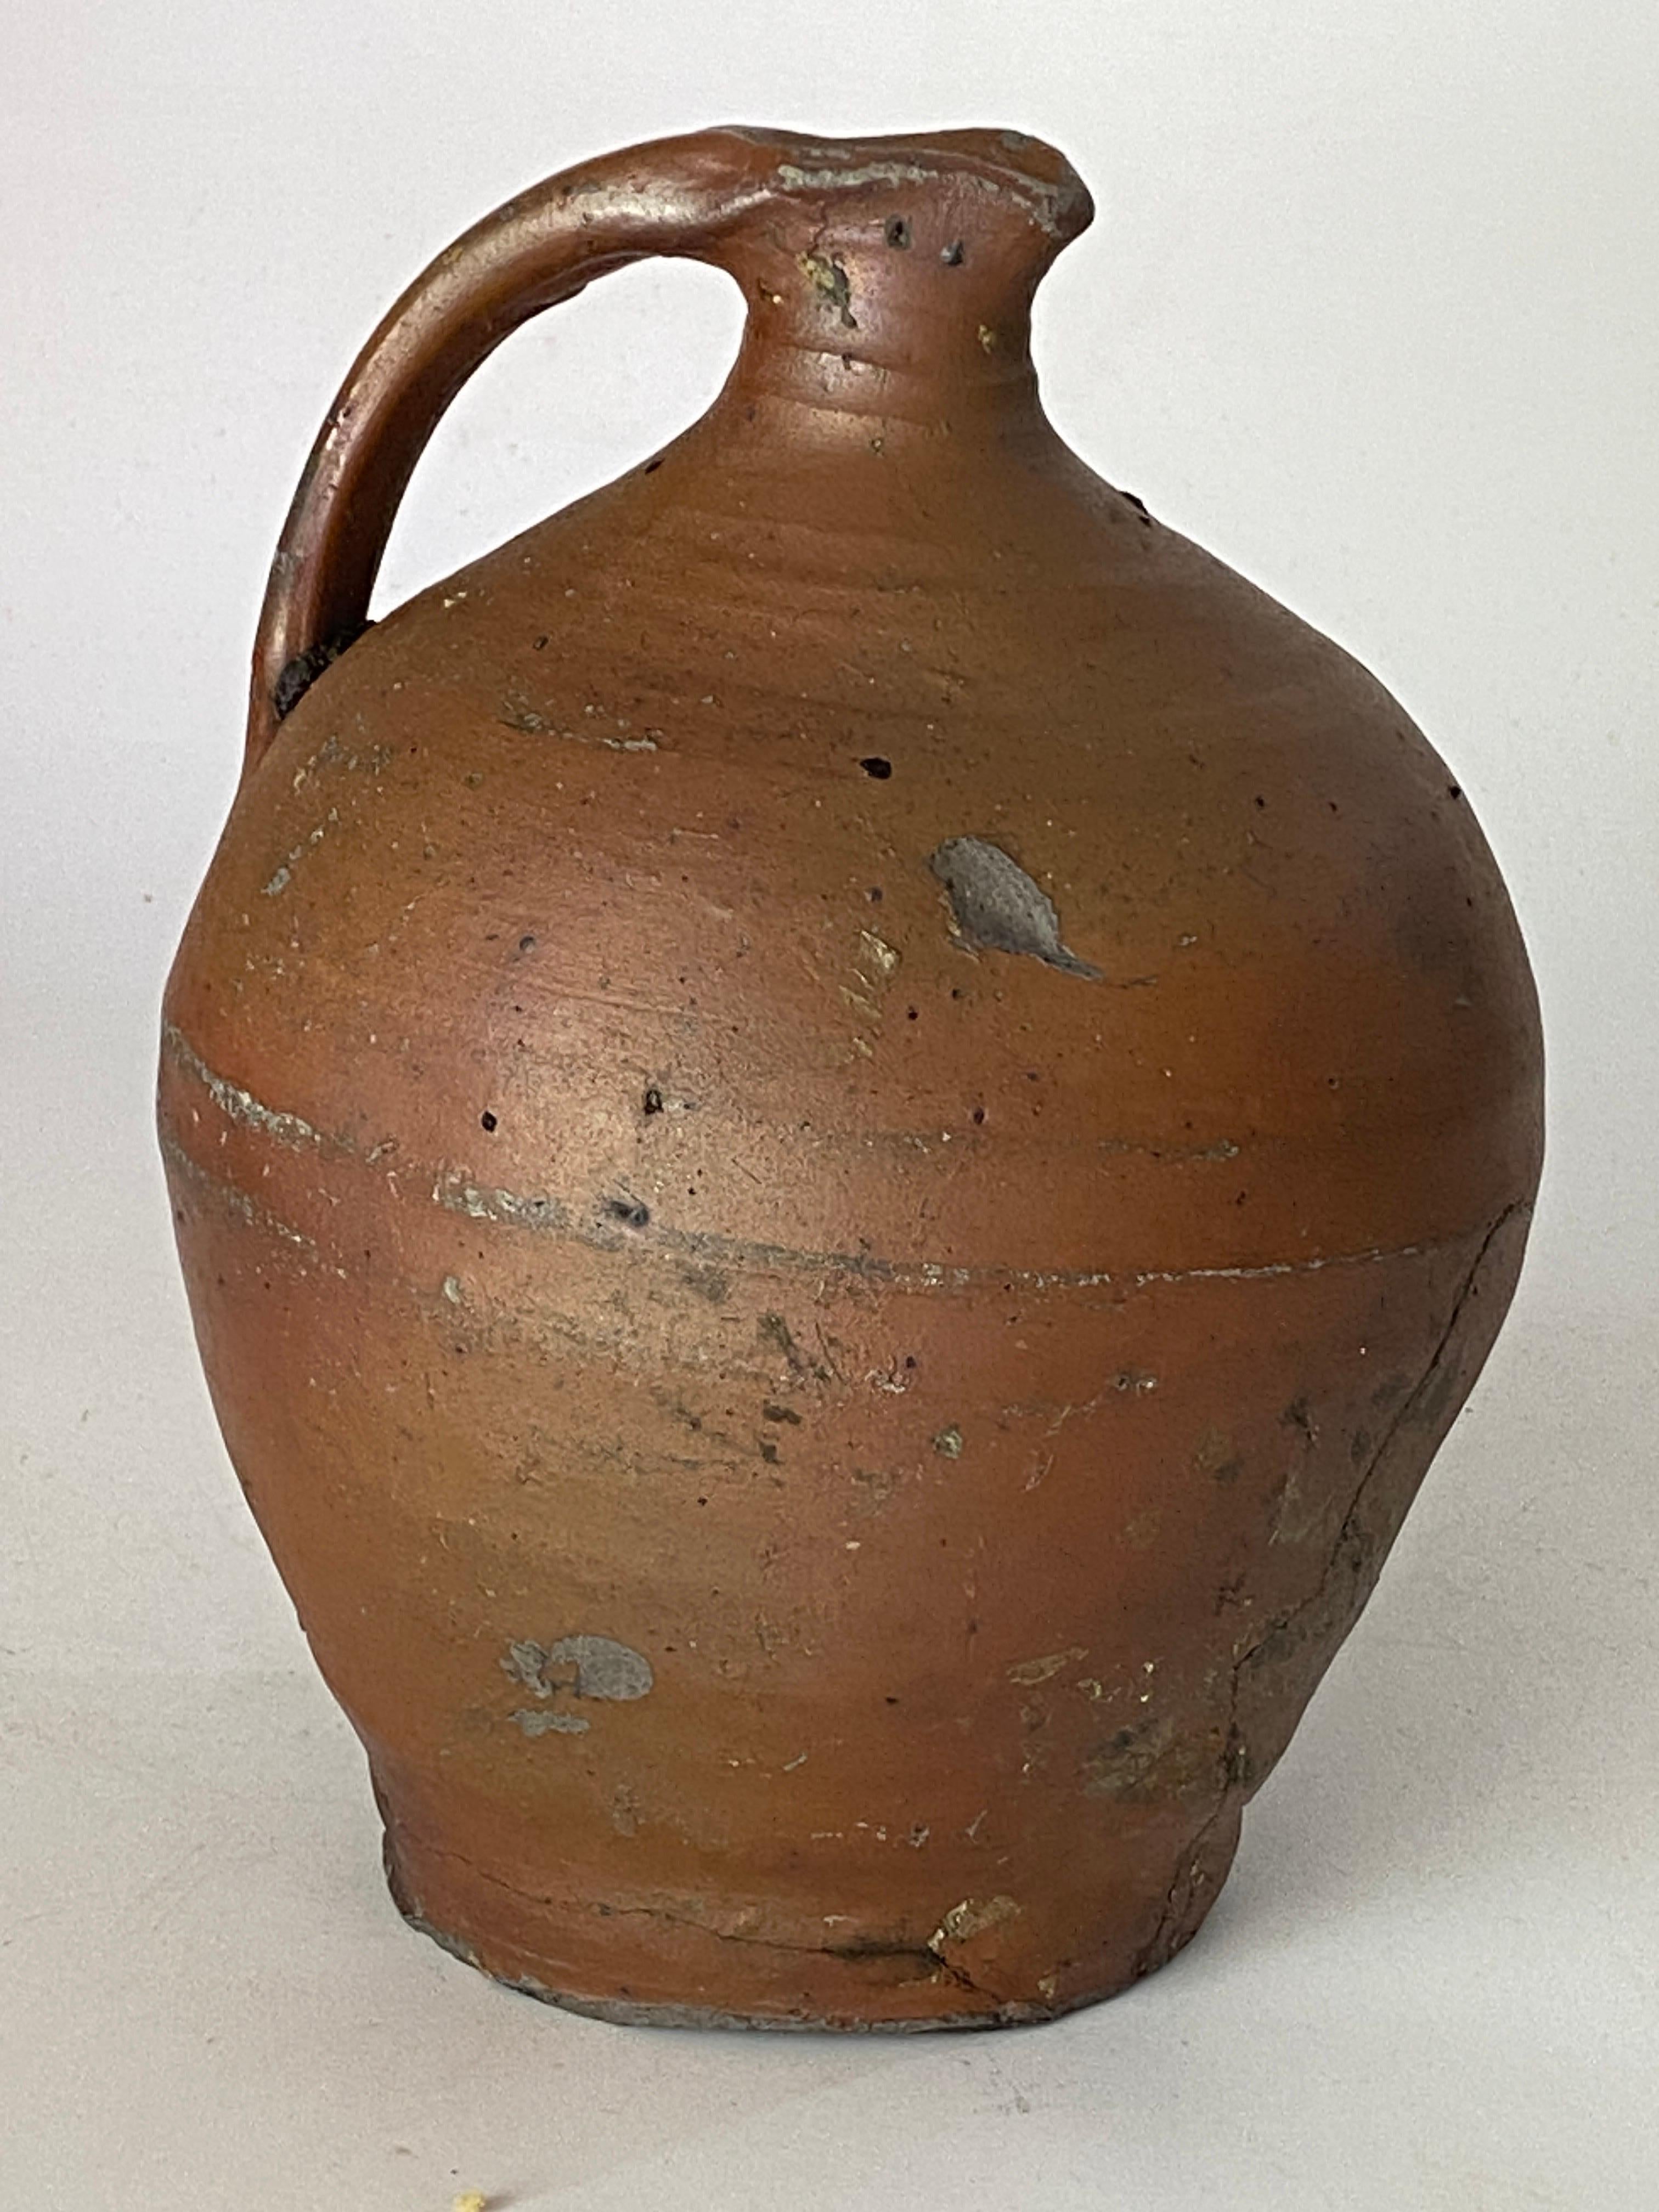 Jug or pitcher in Stoneware, with an exceptional patina. It's color with brown gives very pleasant contrasts. This Pitcher was created in Japan, circa 19th century.